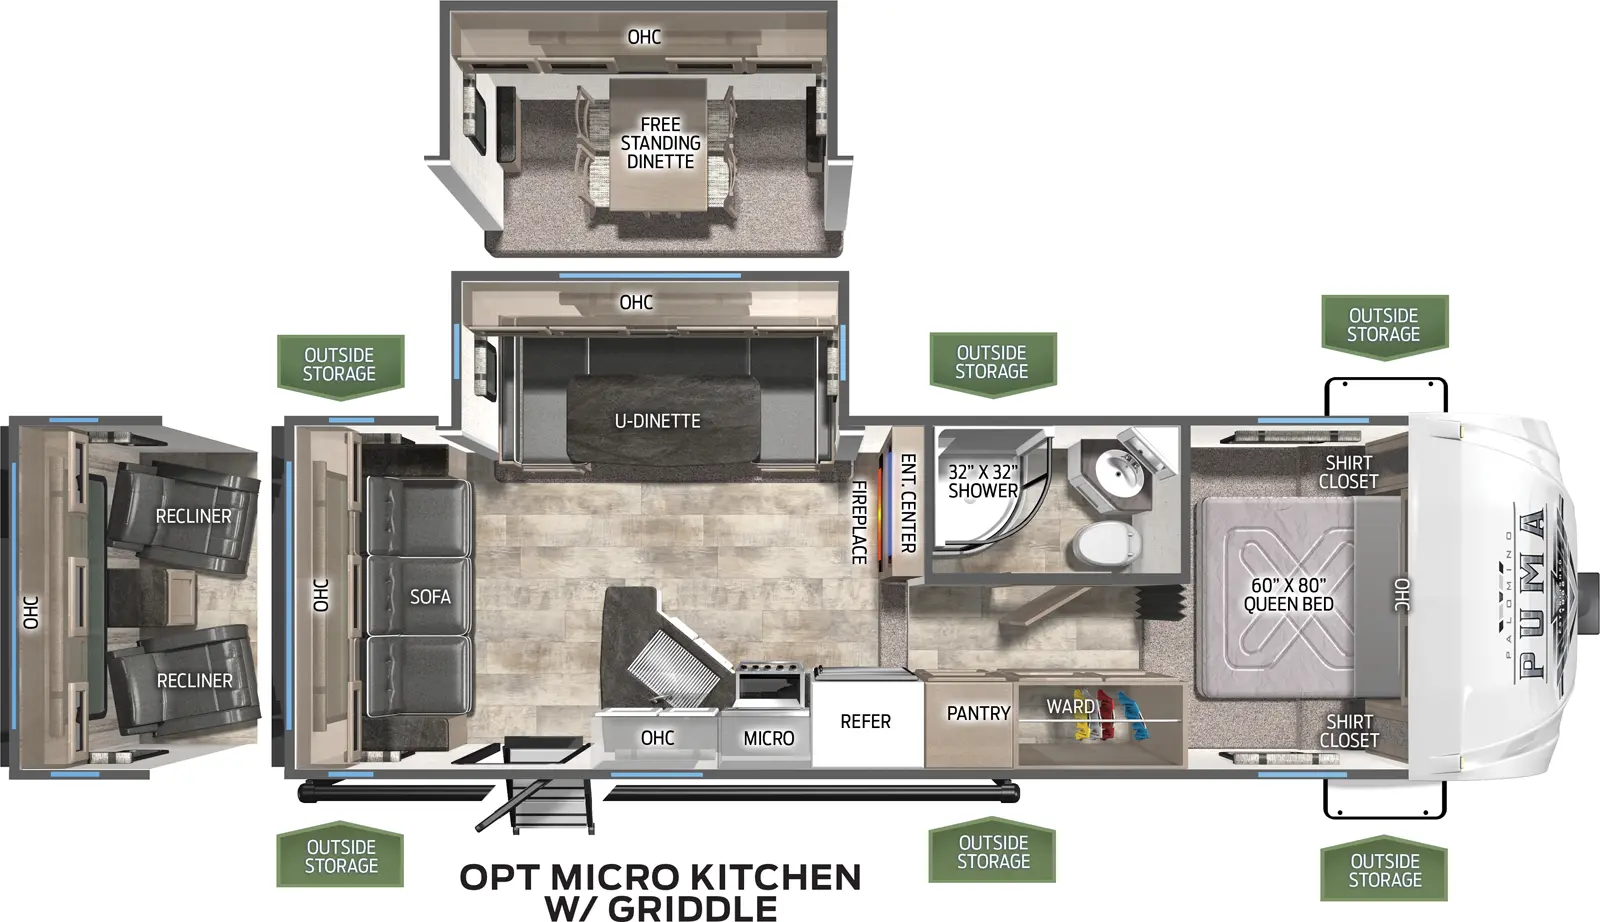 The 253FBS has one slide out on the off door side. Exterior features include a 17 foot awning and a micro outside kitchen. Interior layout from the front to the back: front bedroom with queen bed; wardrobe and pantry; full bathroom; steps into living and kitchen area; slide out containing a U-dinette, optional table and chairs; kitchen contains refrigerator, microwave and cooktop stove; three cushion sofa, optional recliners.
